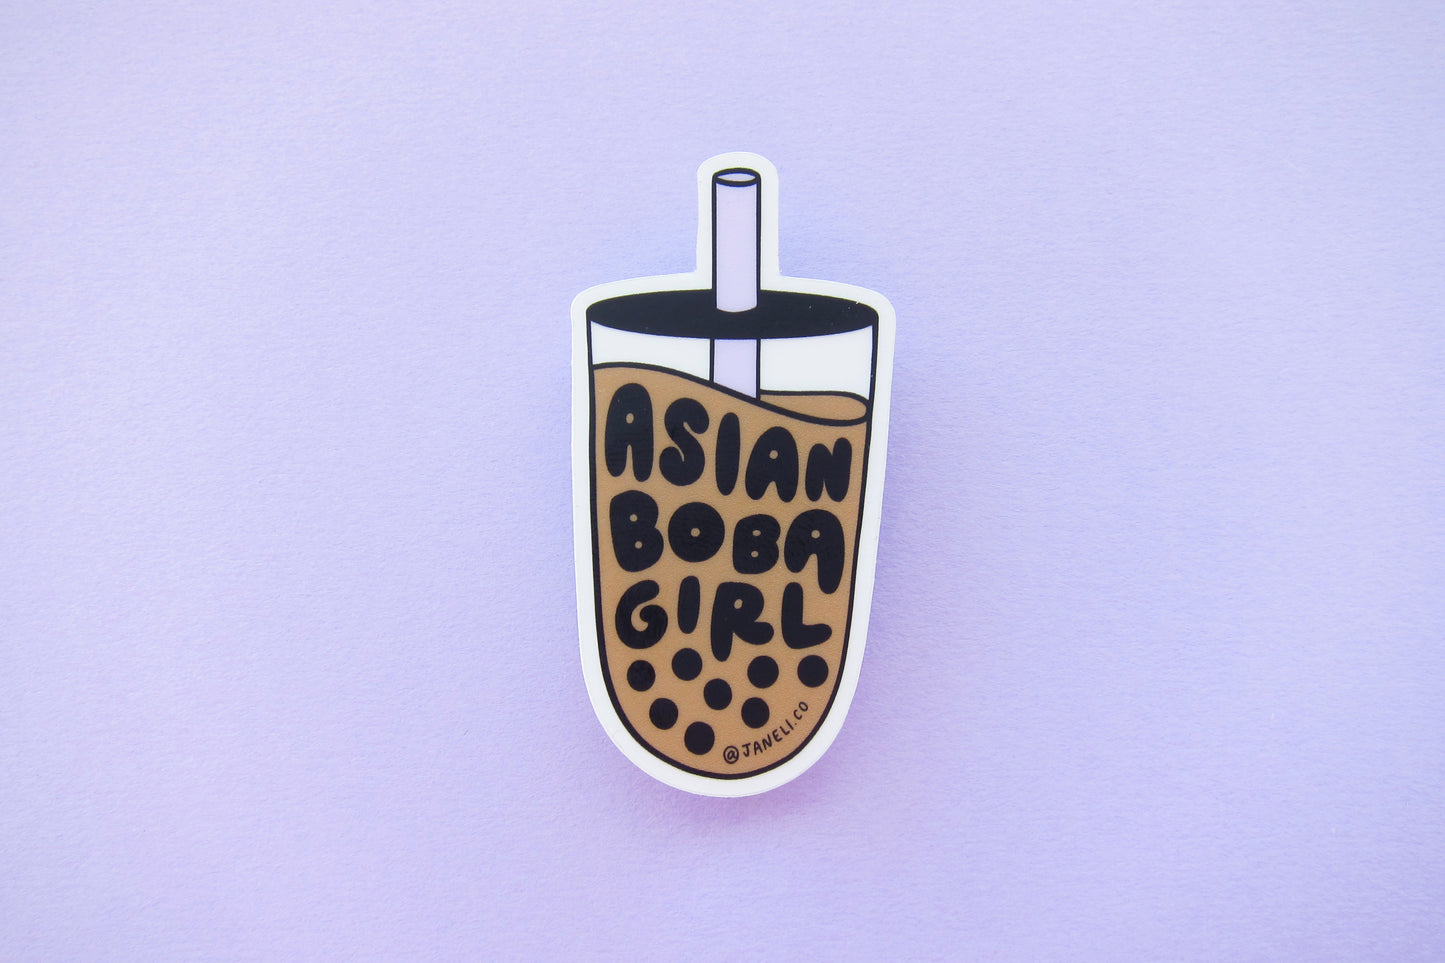 A JaneLi.Co sticker that says "Asian Boba Girl" in the shape of a cup of boba over a lavender background. 